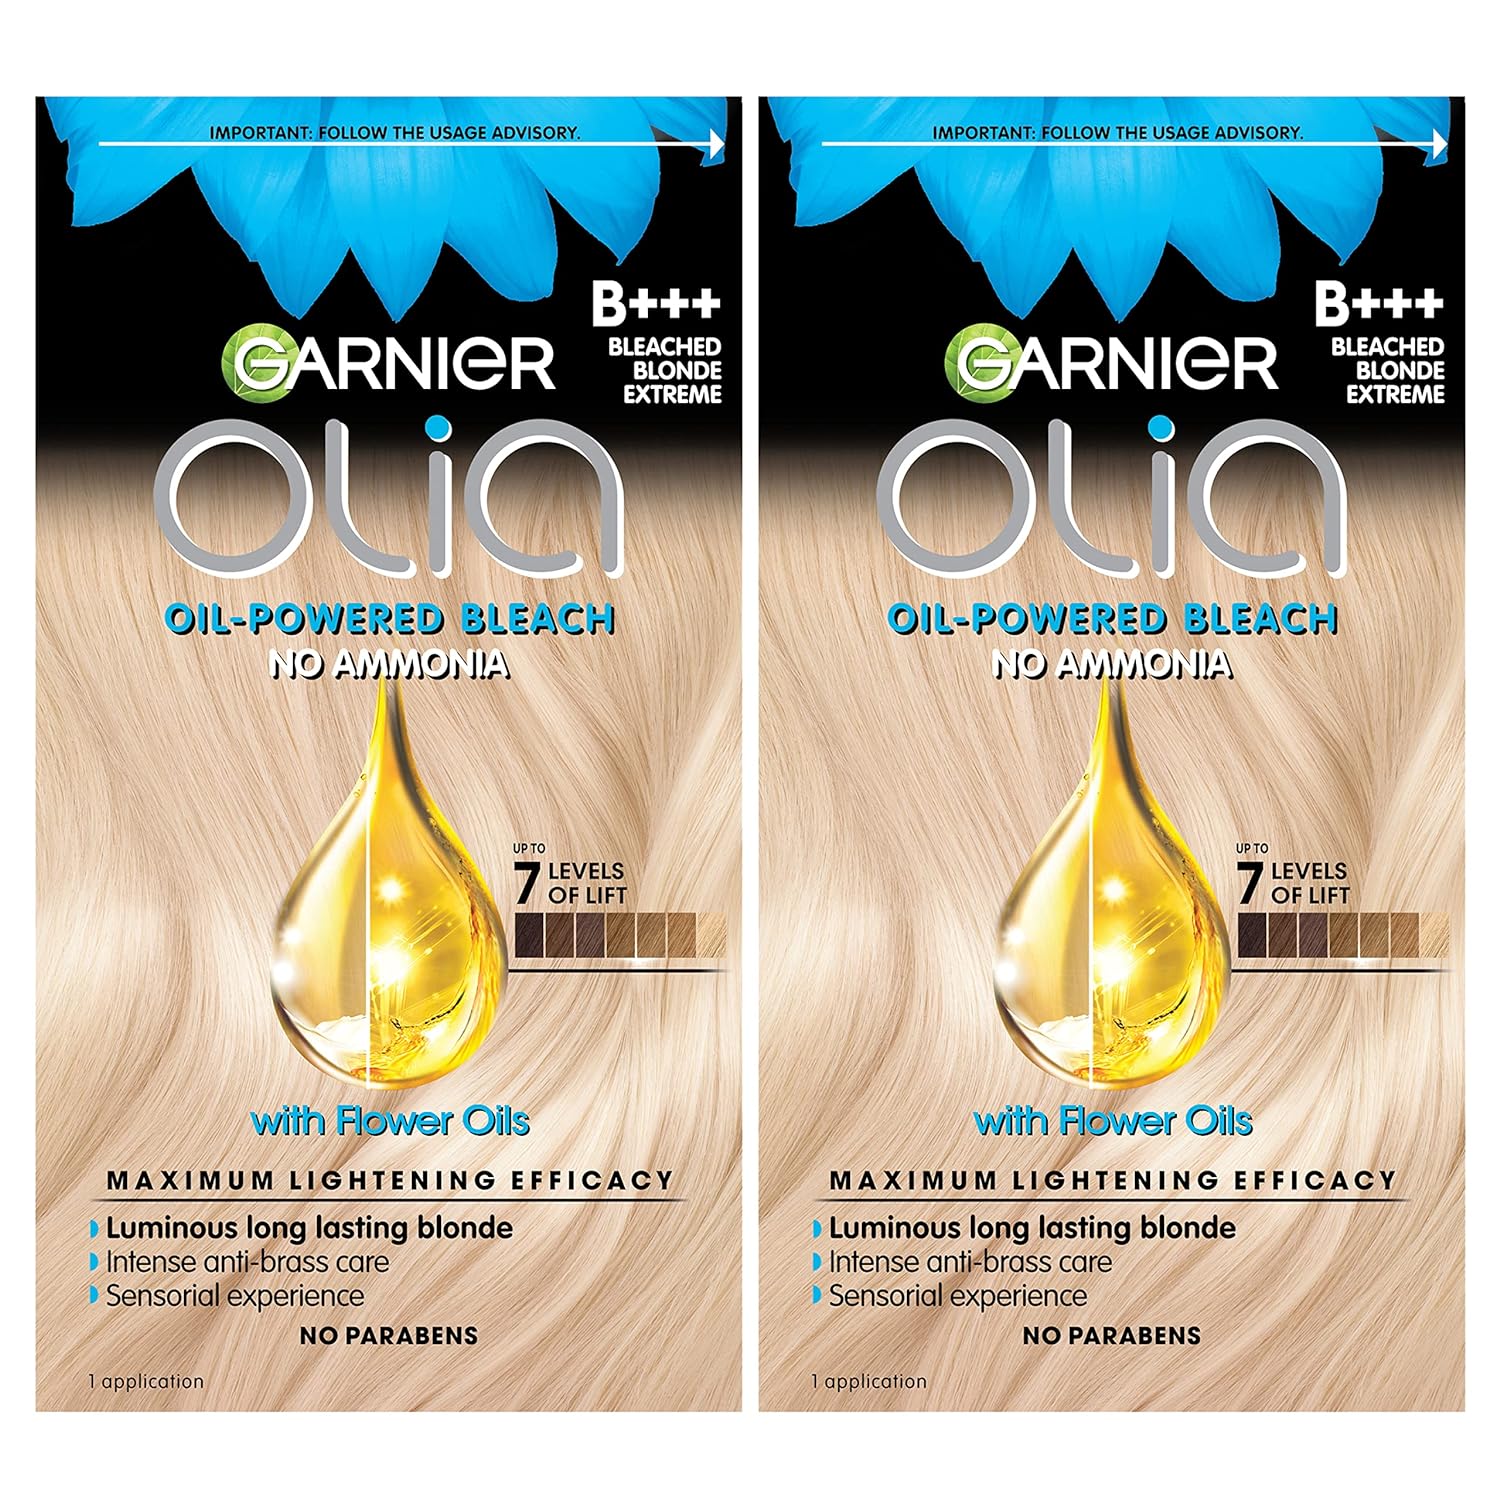 Garnier Hair Color Olia Ammonia-Free Brilliant Color Oil-Rich Permanent Hair Dye, B+++ Bleach Blonde Extreme, 2 Count (Packaging May Vary)